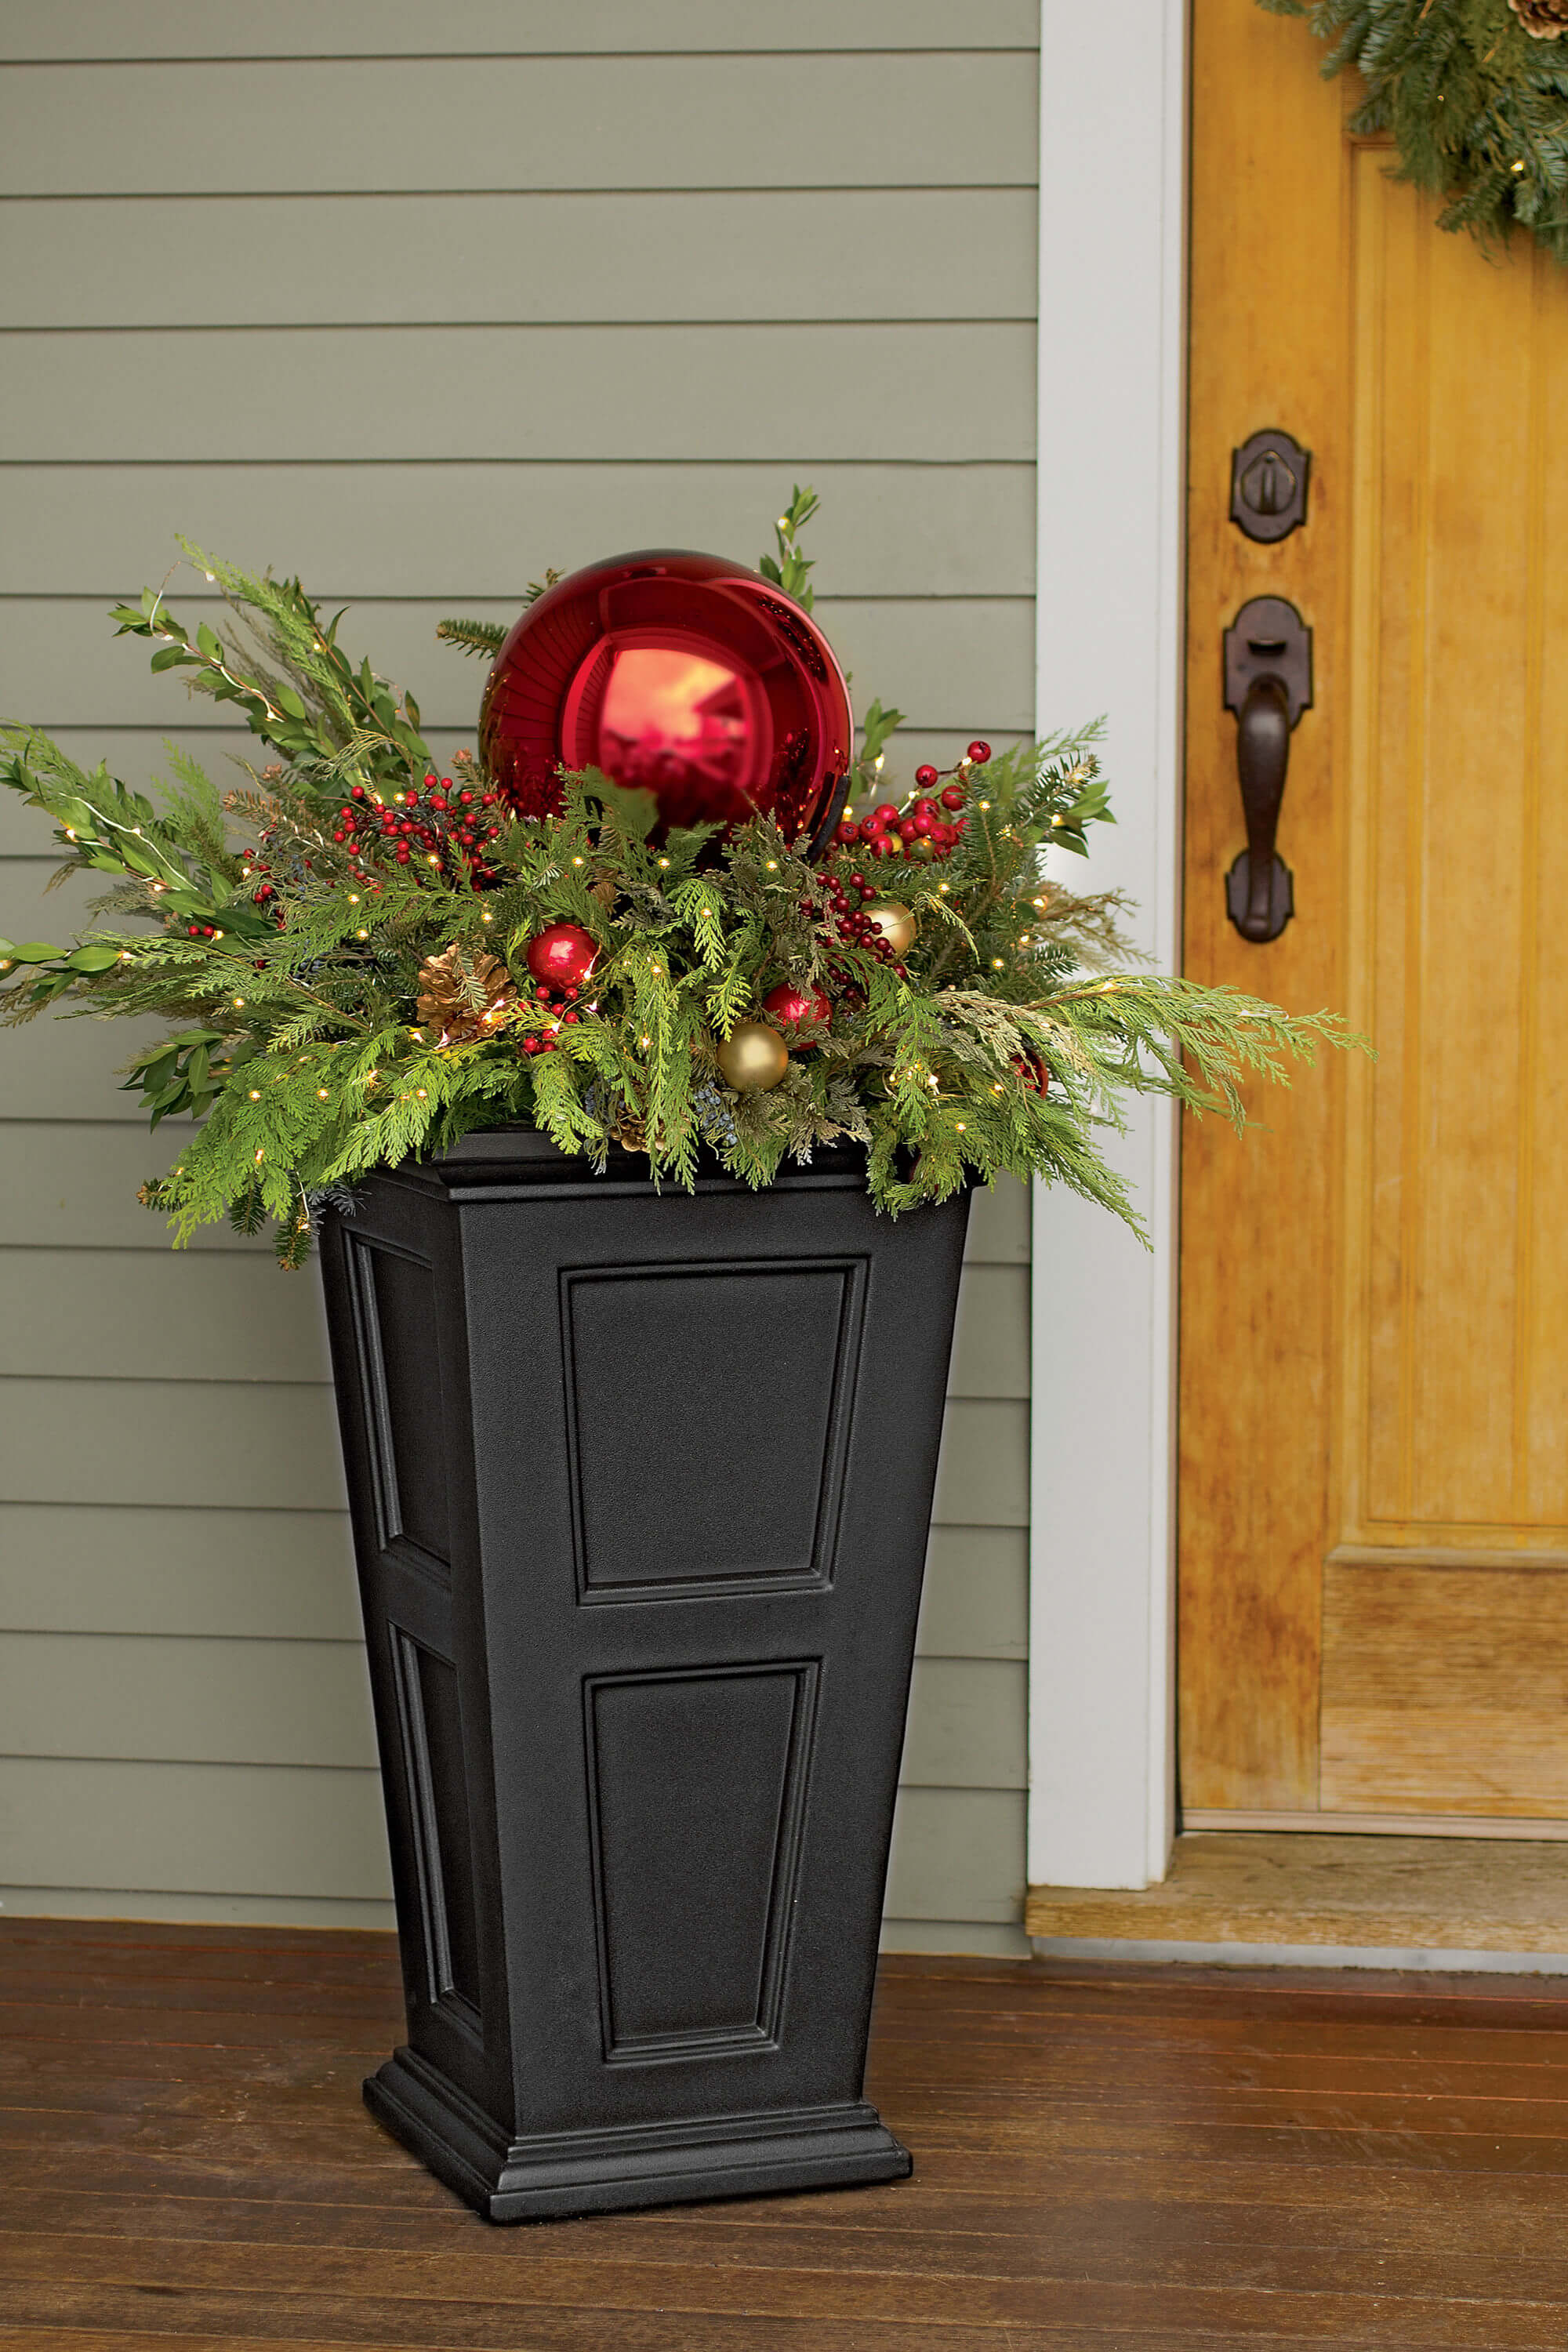 35 Best Outdoor Holiday Planter Ideas and Designs for 2020